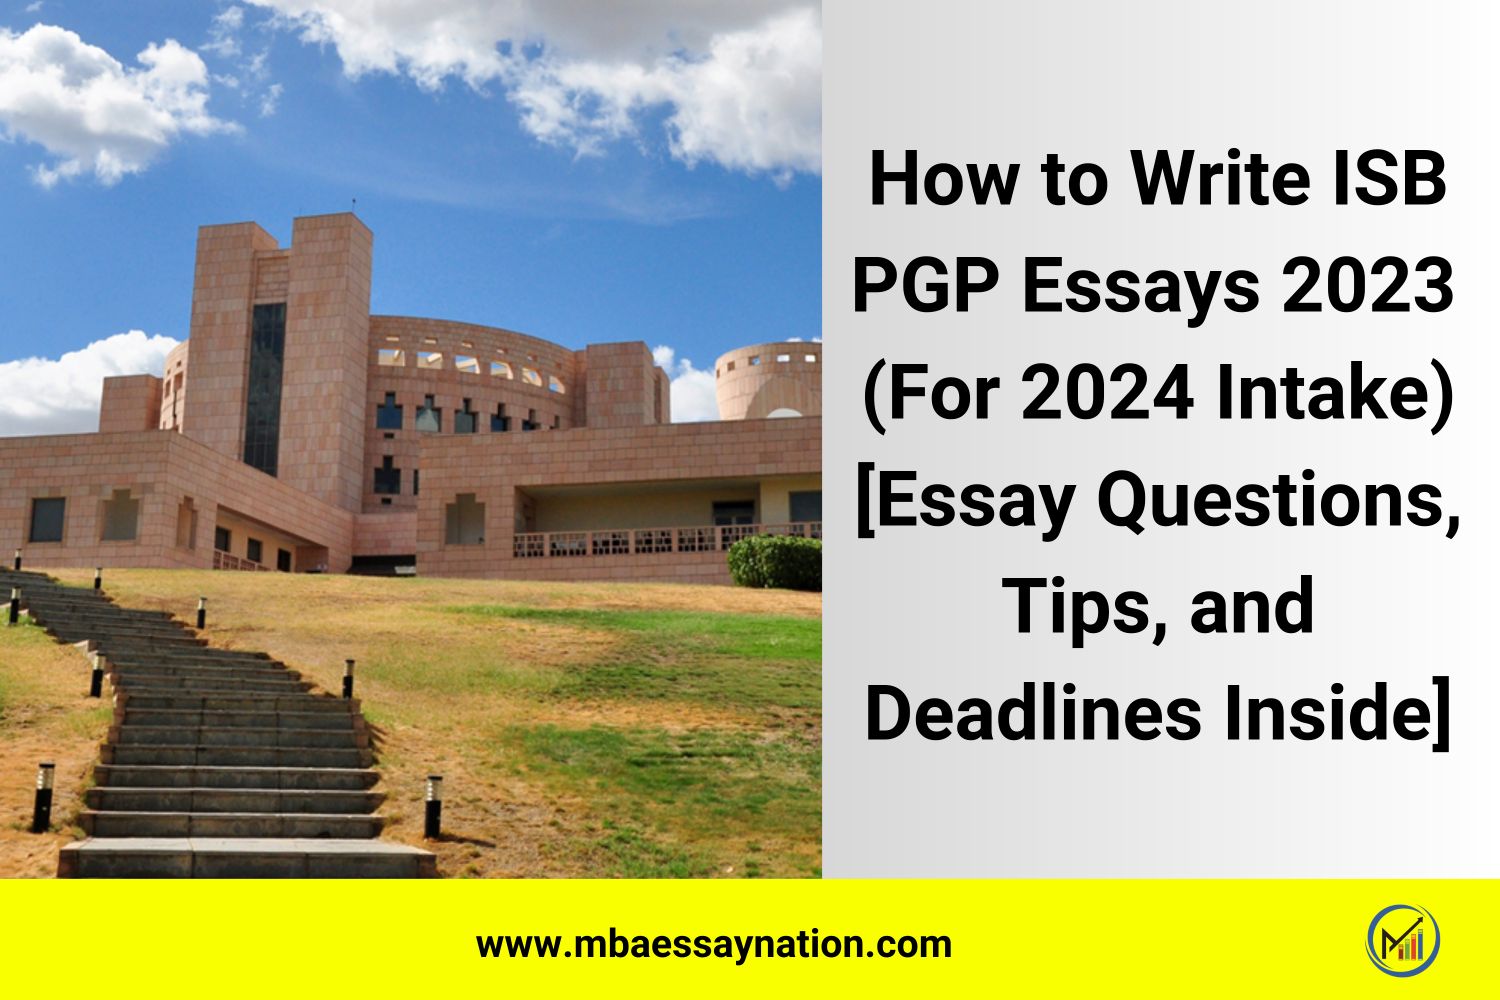 Tips on How to Write ISB PGP Essays 2024 Intake